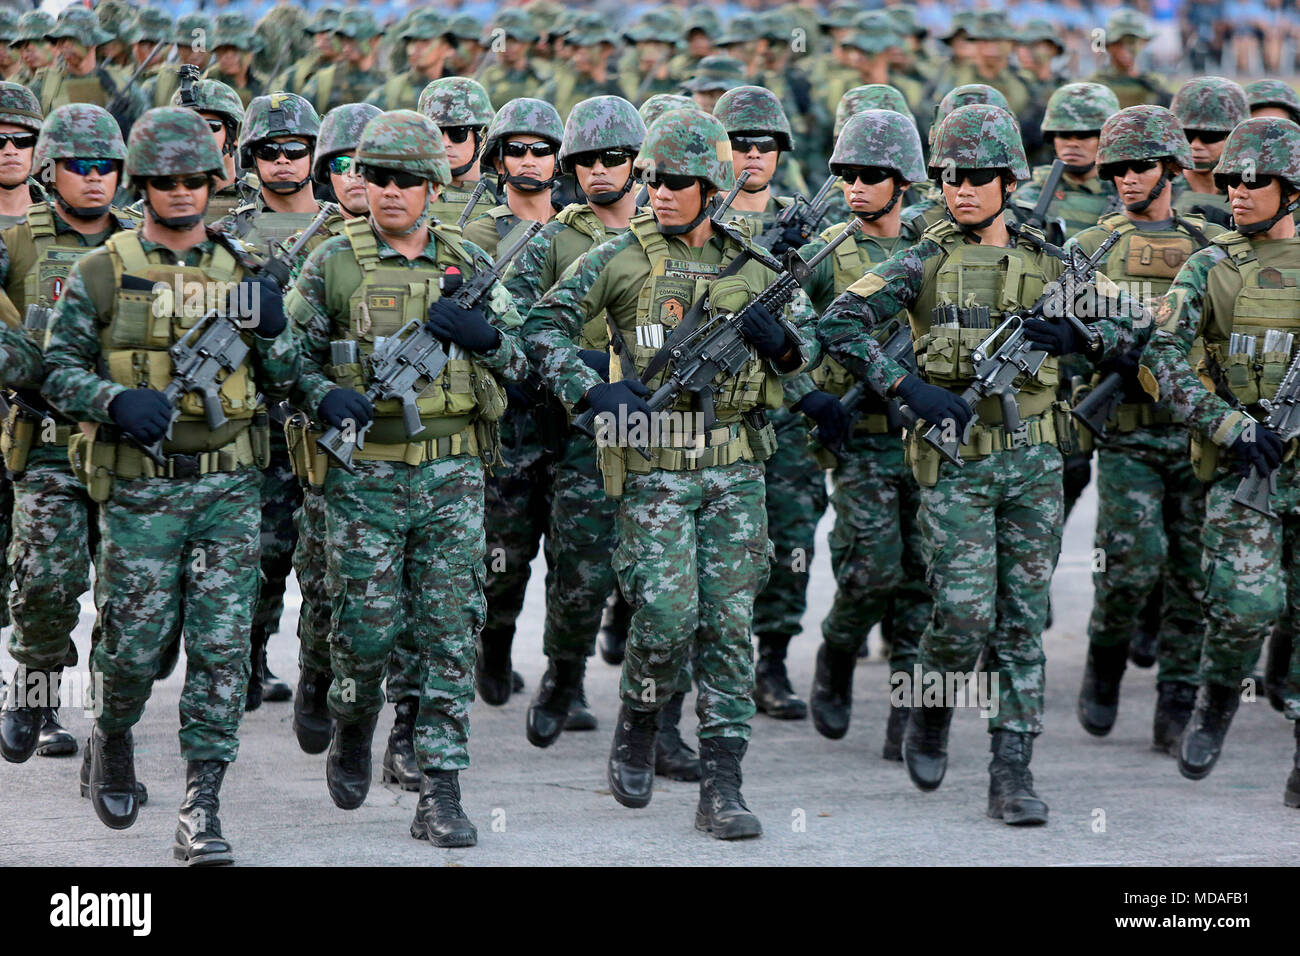 Quezon City, Philippines. 19th Apr, 2018. Members of the Special Action Force of the Philippine National Police (PNP-SAF) march during the PNP's command handover ceremony inside Camp Crame in Quezon City, the Philippines, April 19, 2018. Philippine President Rodrigo Duterte named Oscar Albayalde as the new head of the PNP on April 5 and the command handover ceremony was held here on Thursday. Credit: Rouelle Umali/Xinhua/Alamy Live News Stock Photo